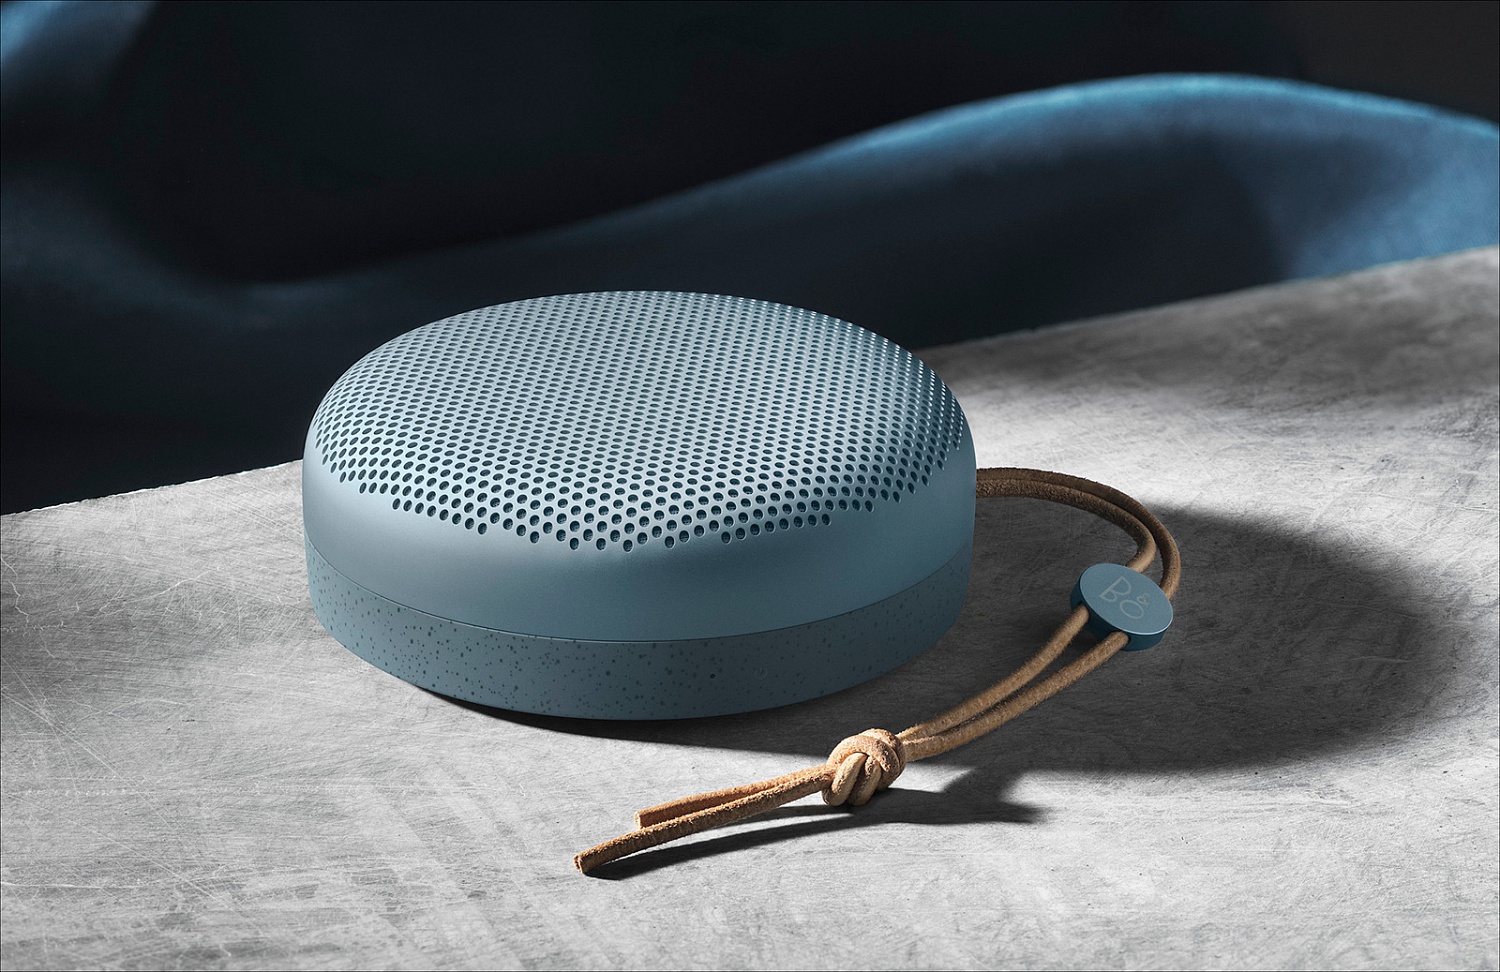 Bang & Olufsen Beoplay A1